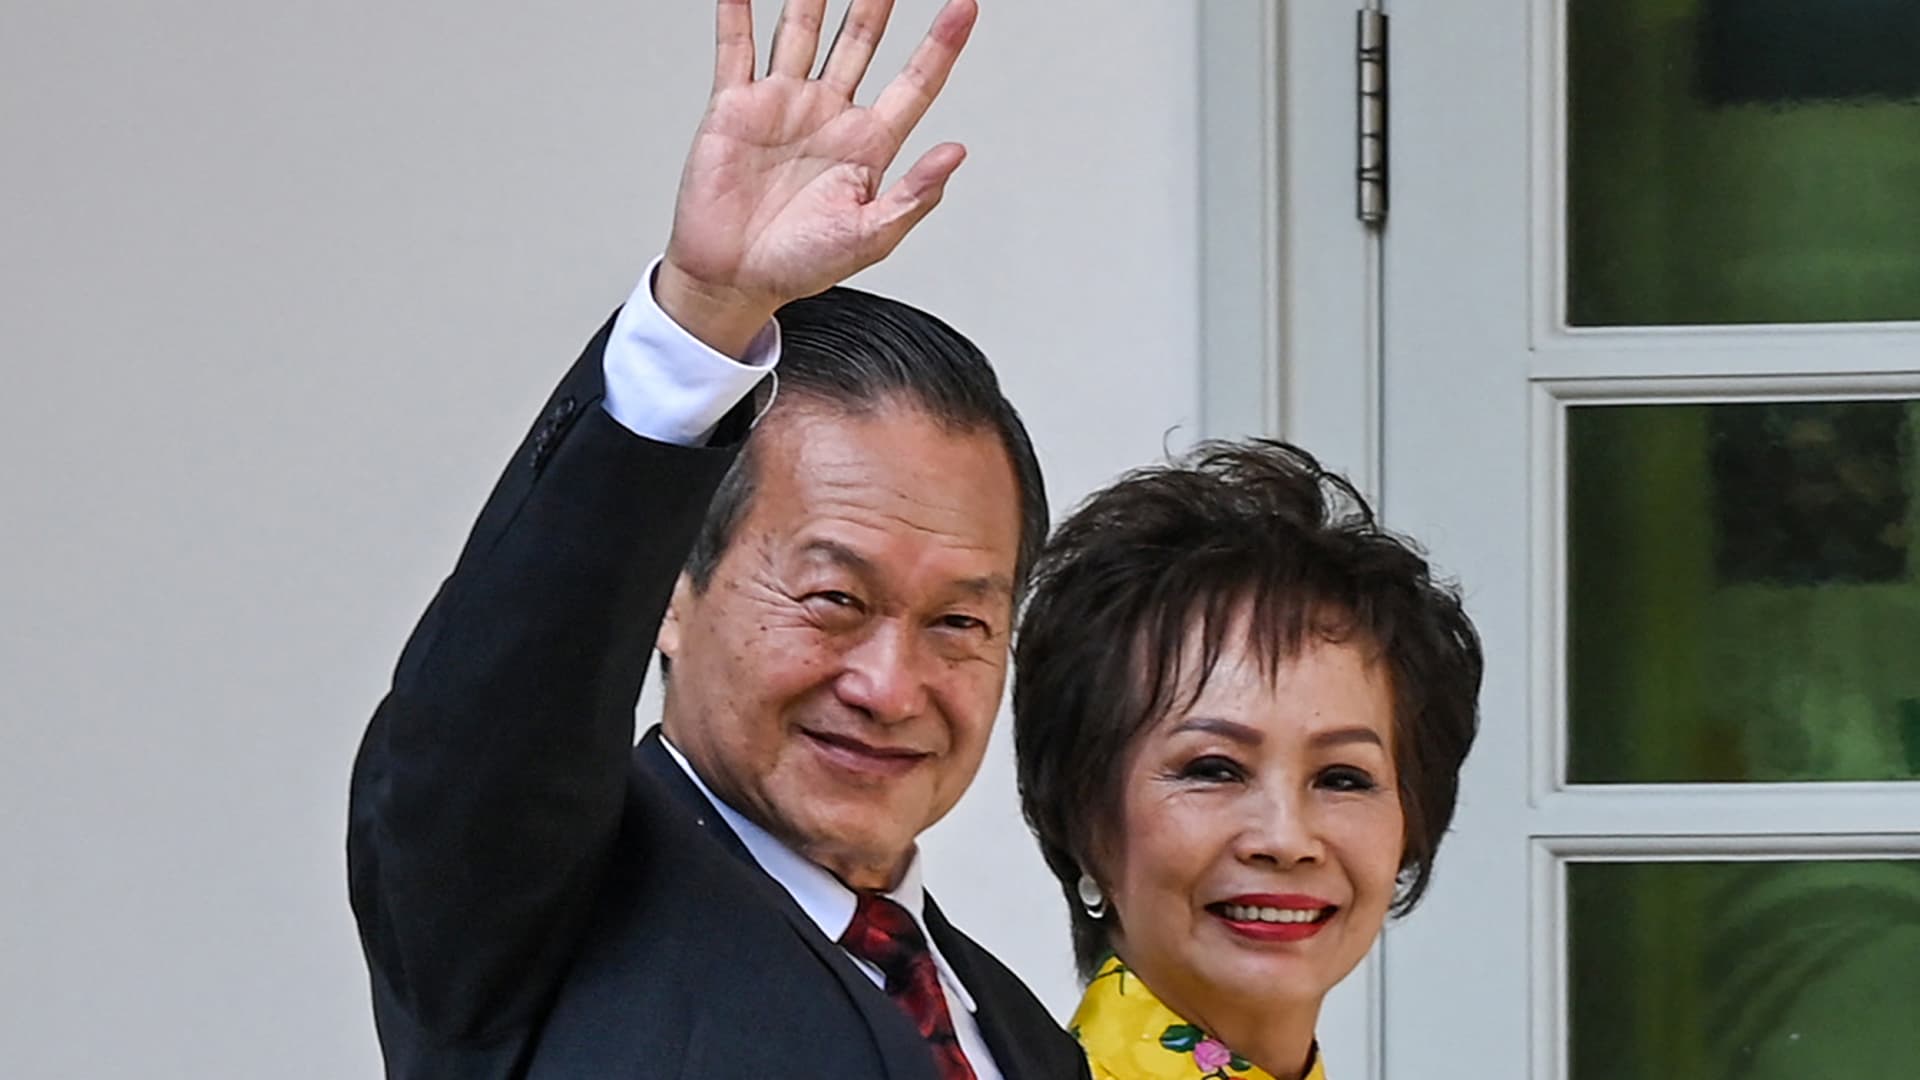 Presidential candidate Tan Kin Lian (left) waves as he arrives at the nomination center for the presidential election in Singapore on August 22, 2023.